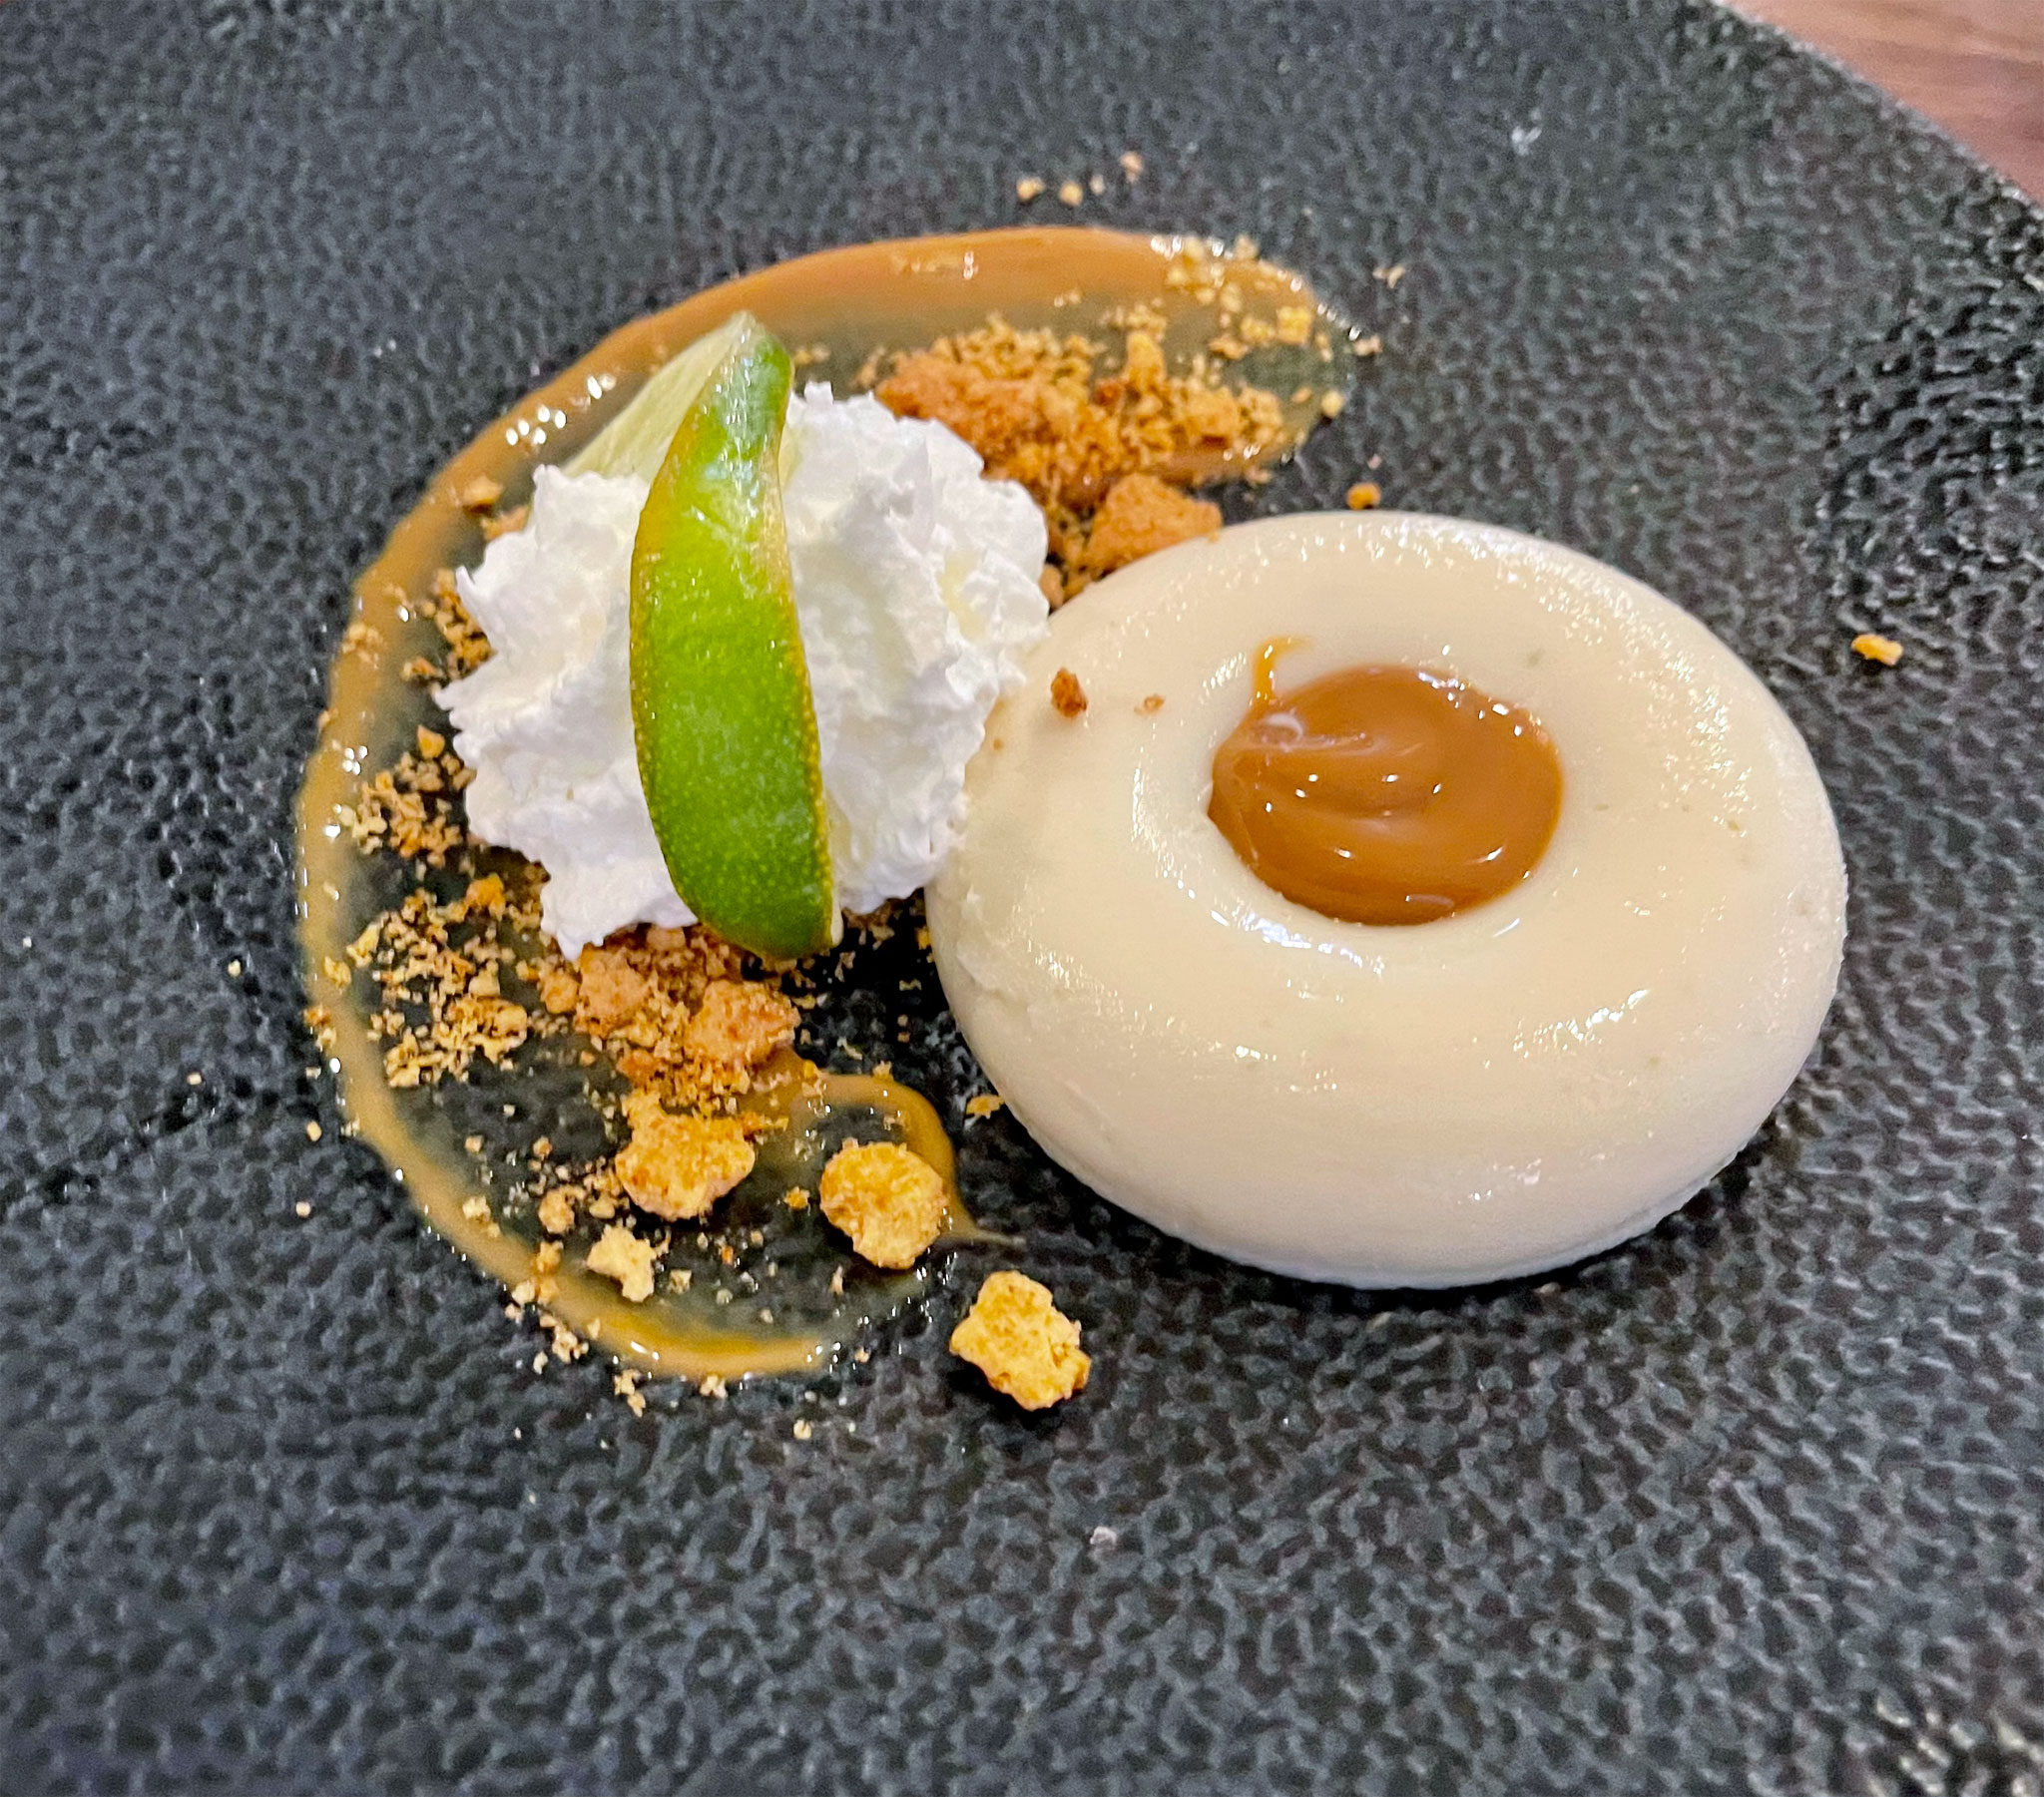 Deconstructed Key Lime Pie